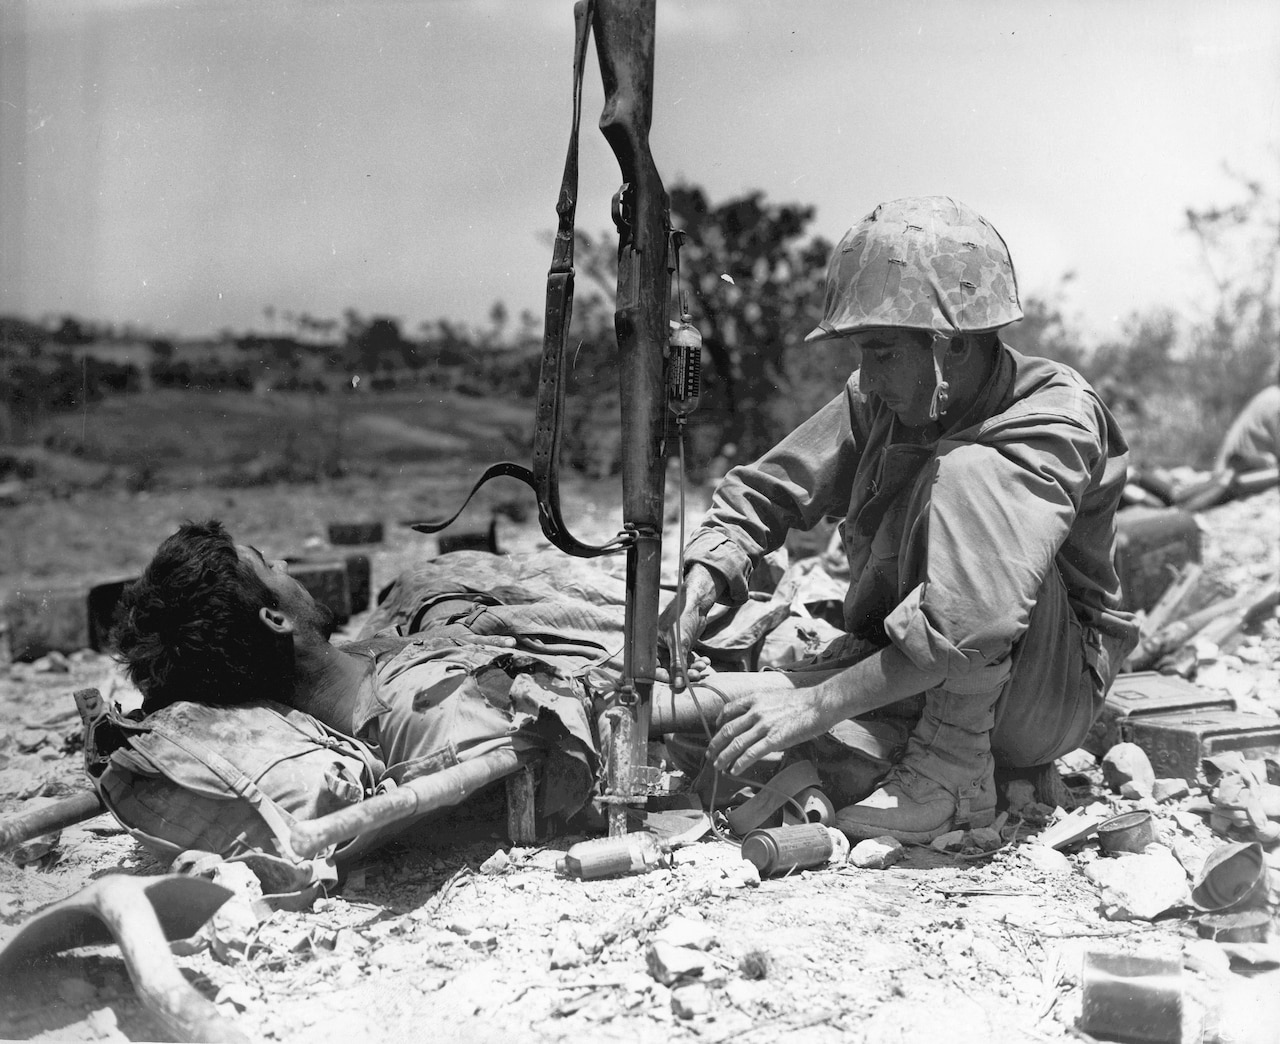 A wounded serviceman is attended by another service member.